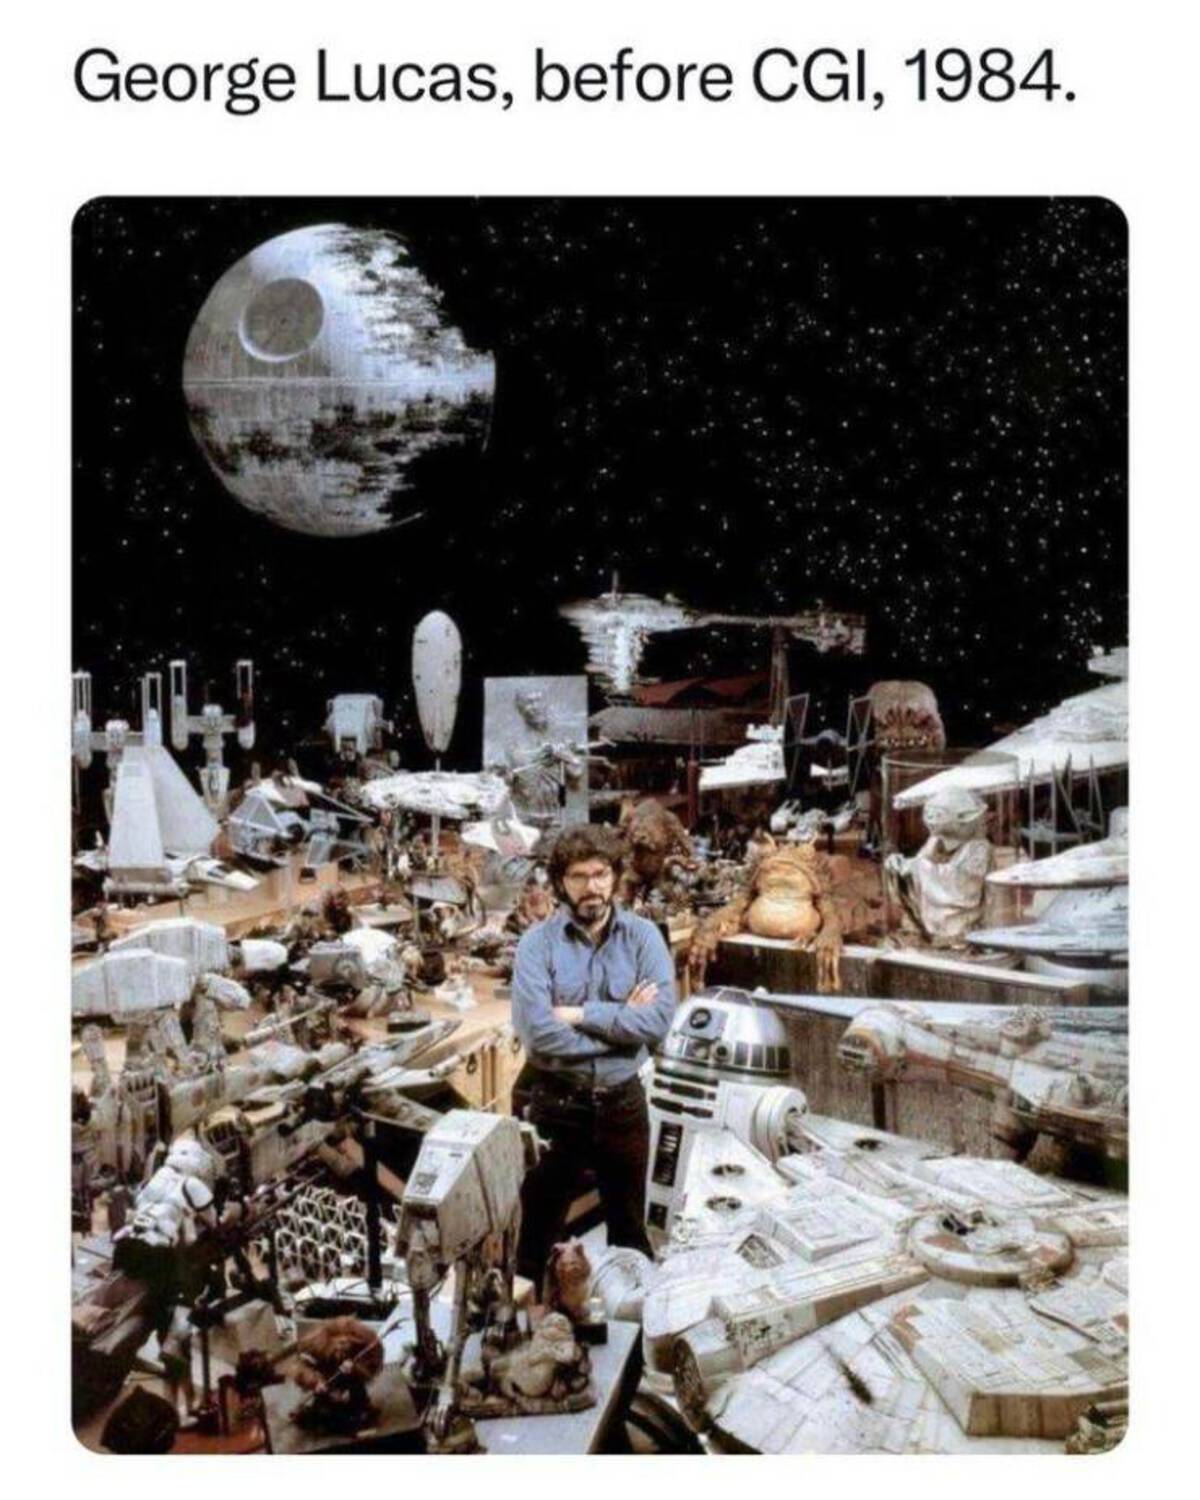 george lucas with star wars props - George Lucas, before Cgi, 1984. 14